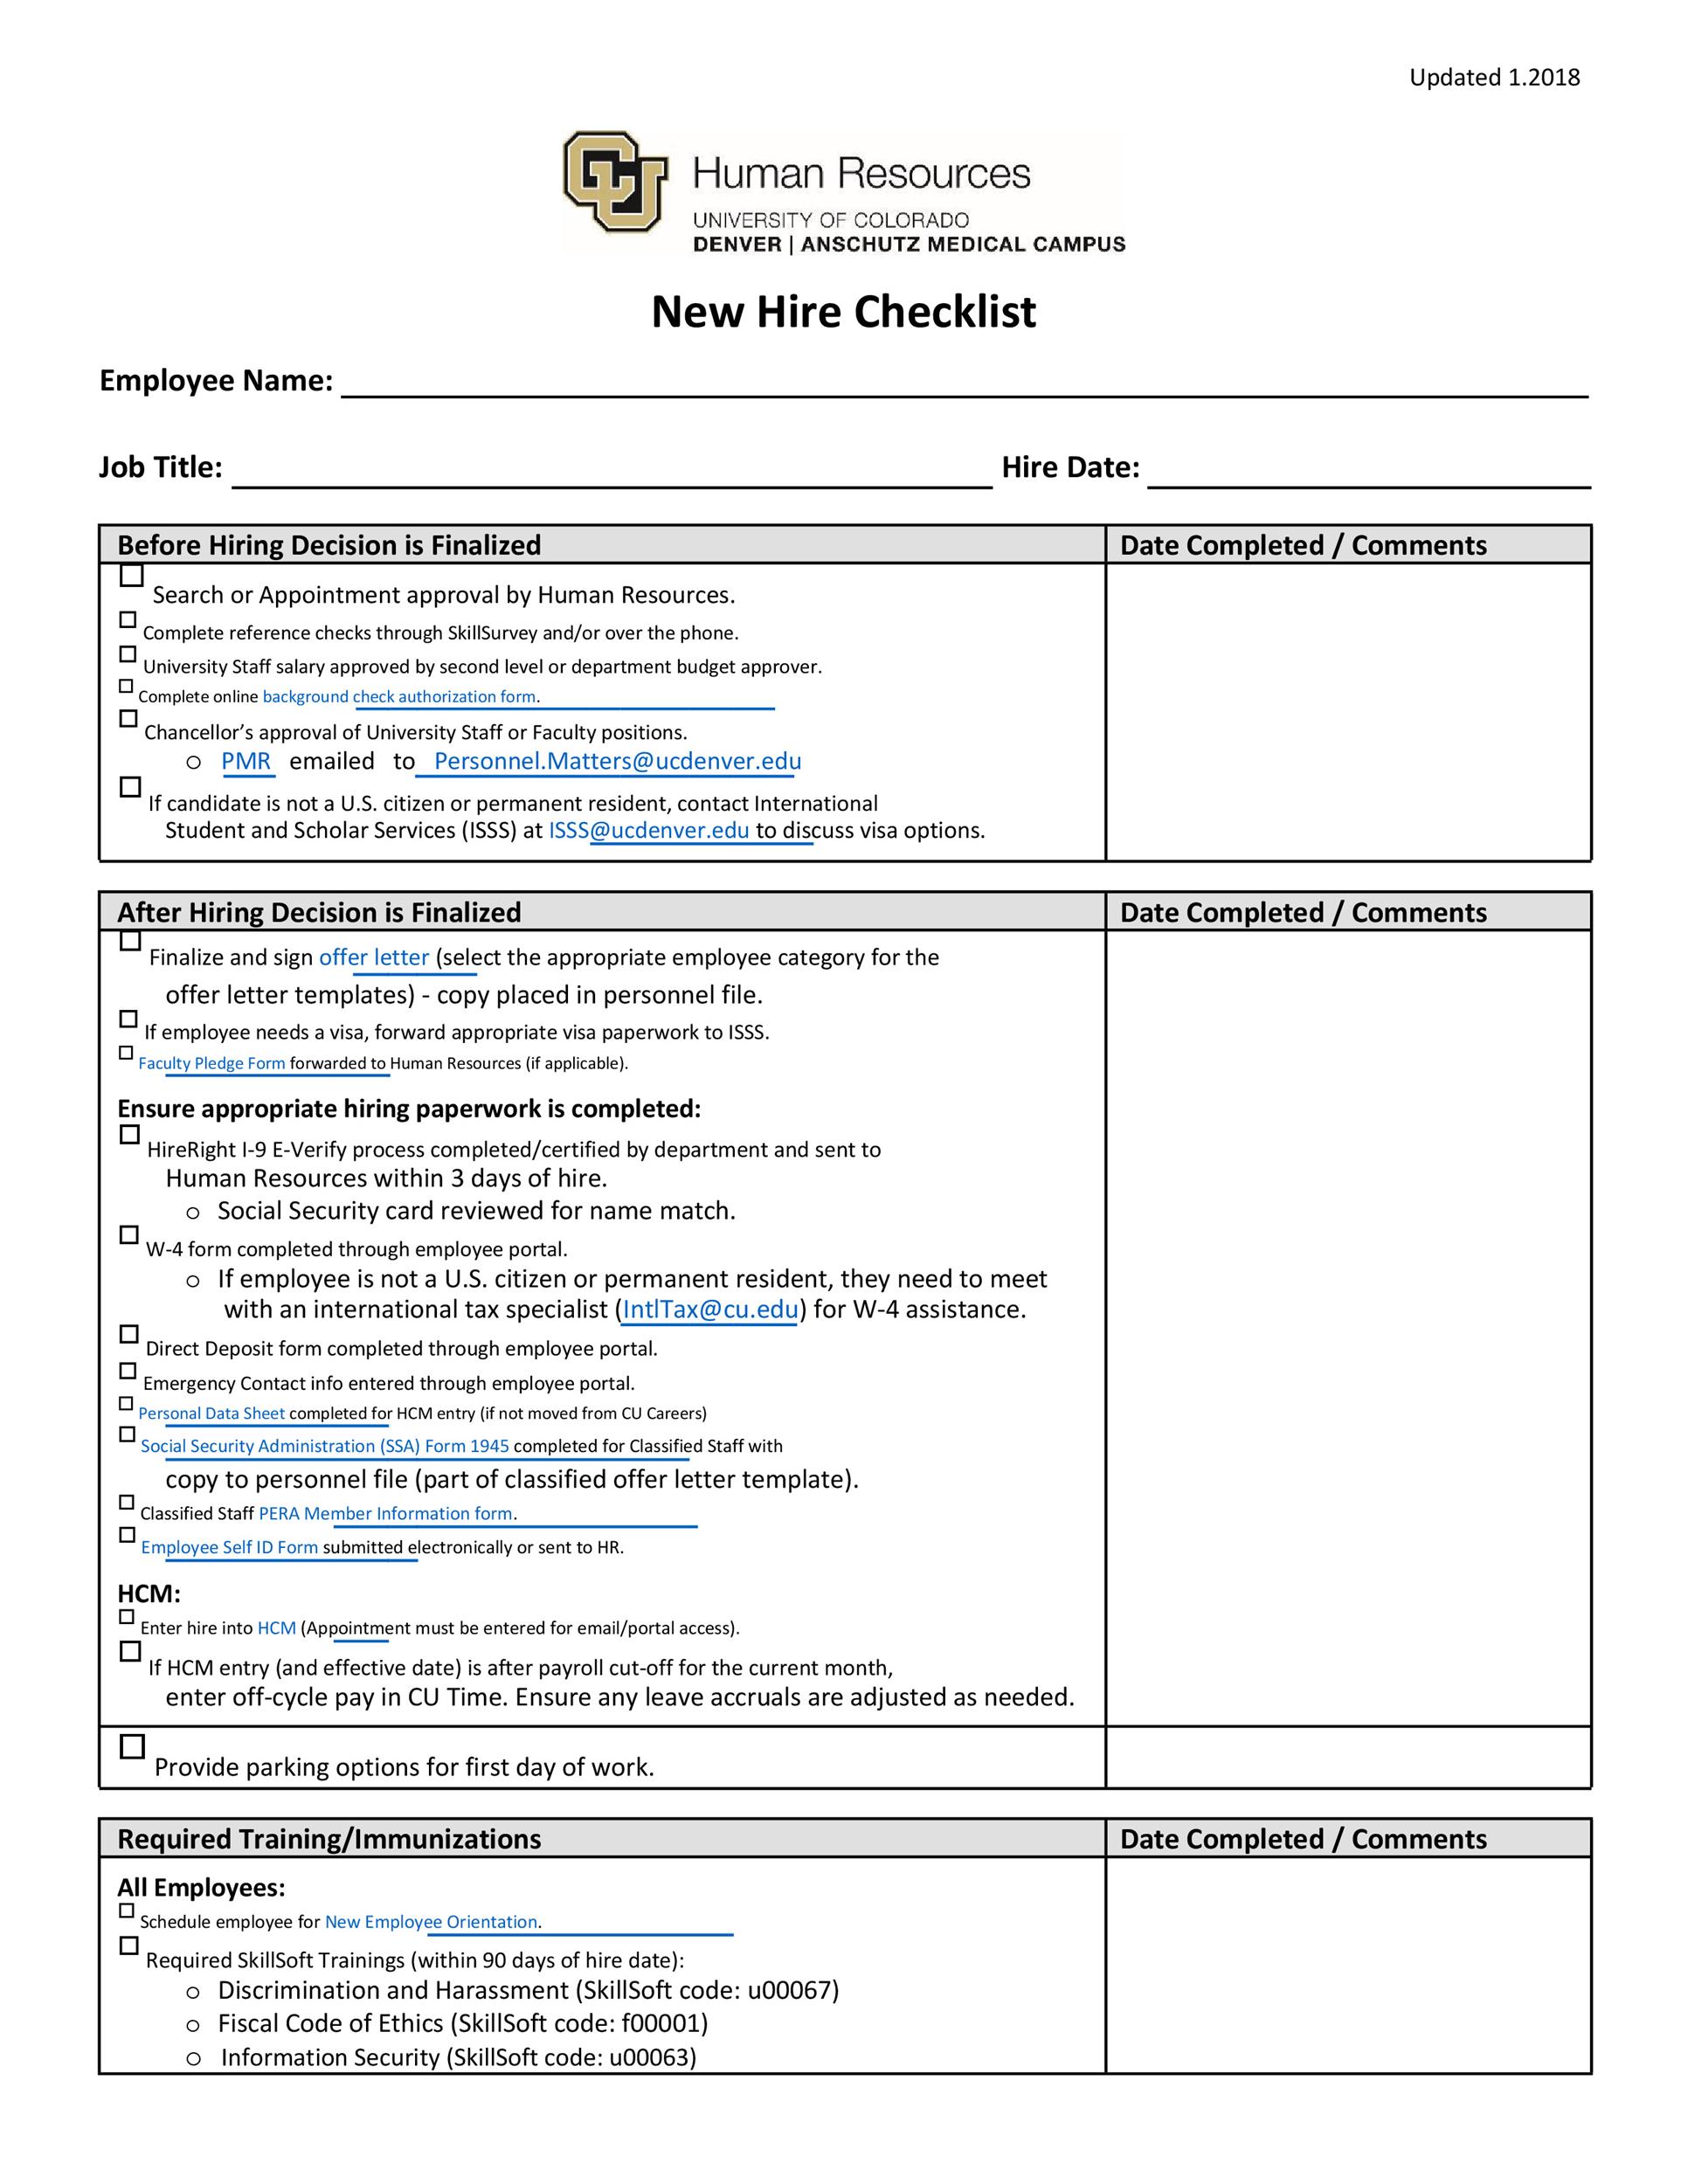 50 Useful New Hire Checklist Templates Forms ᐅ TemplateLab